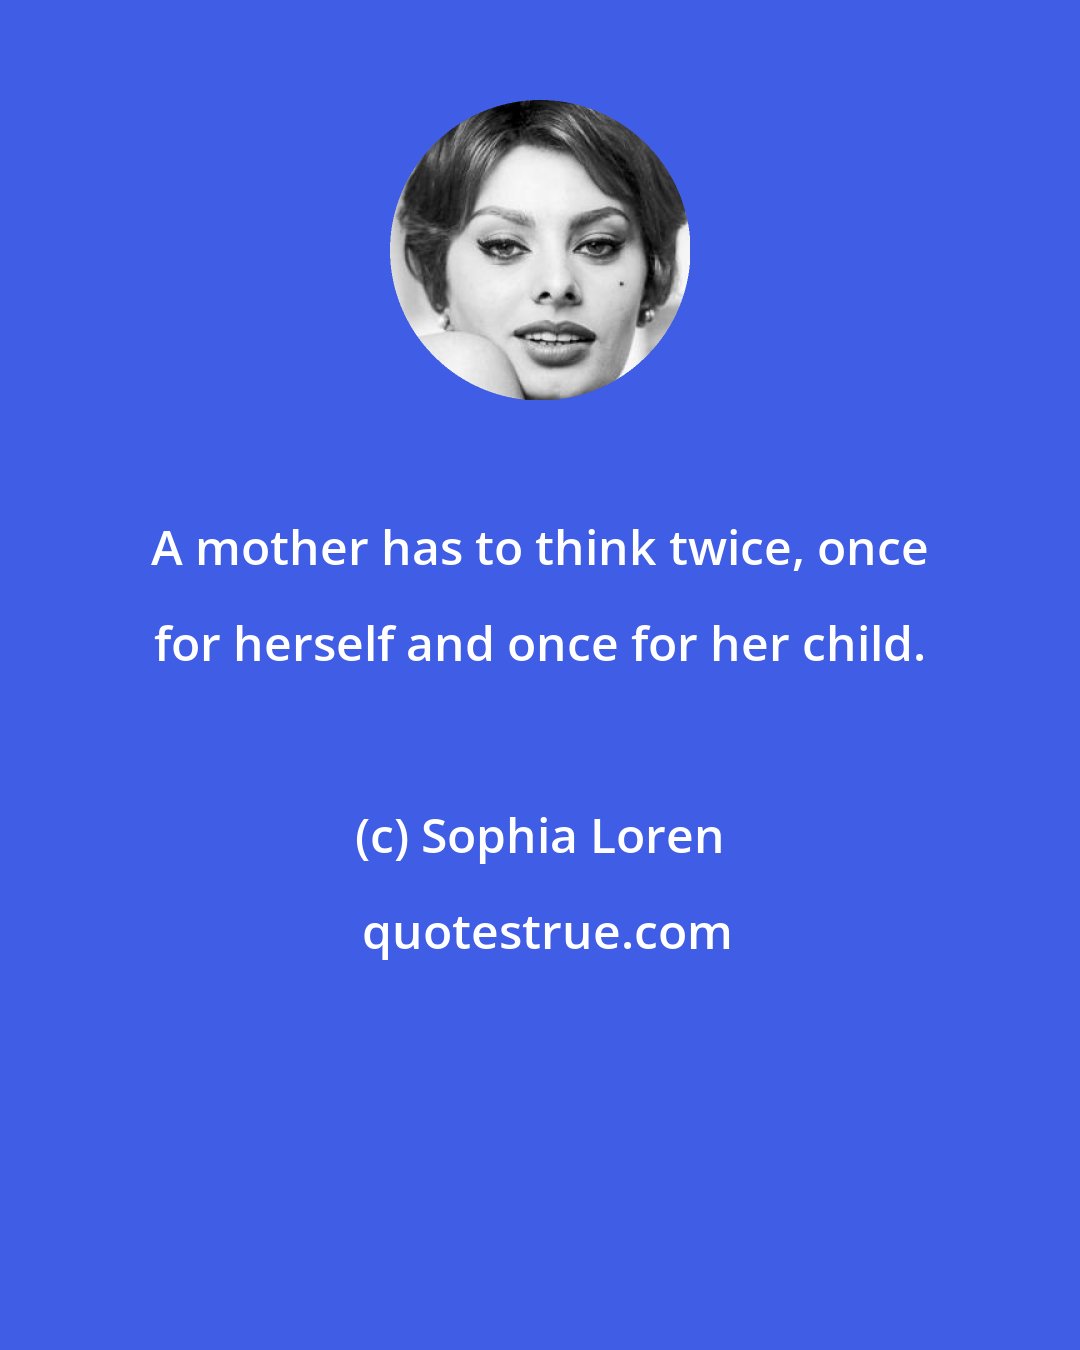 Sophia Loren: A mother has to think twice, once for herself and once for her child.